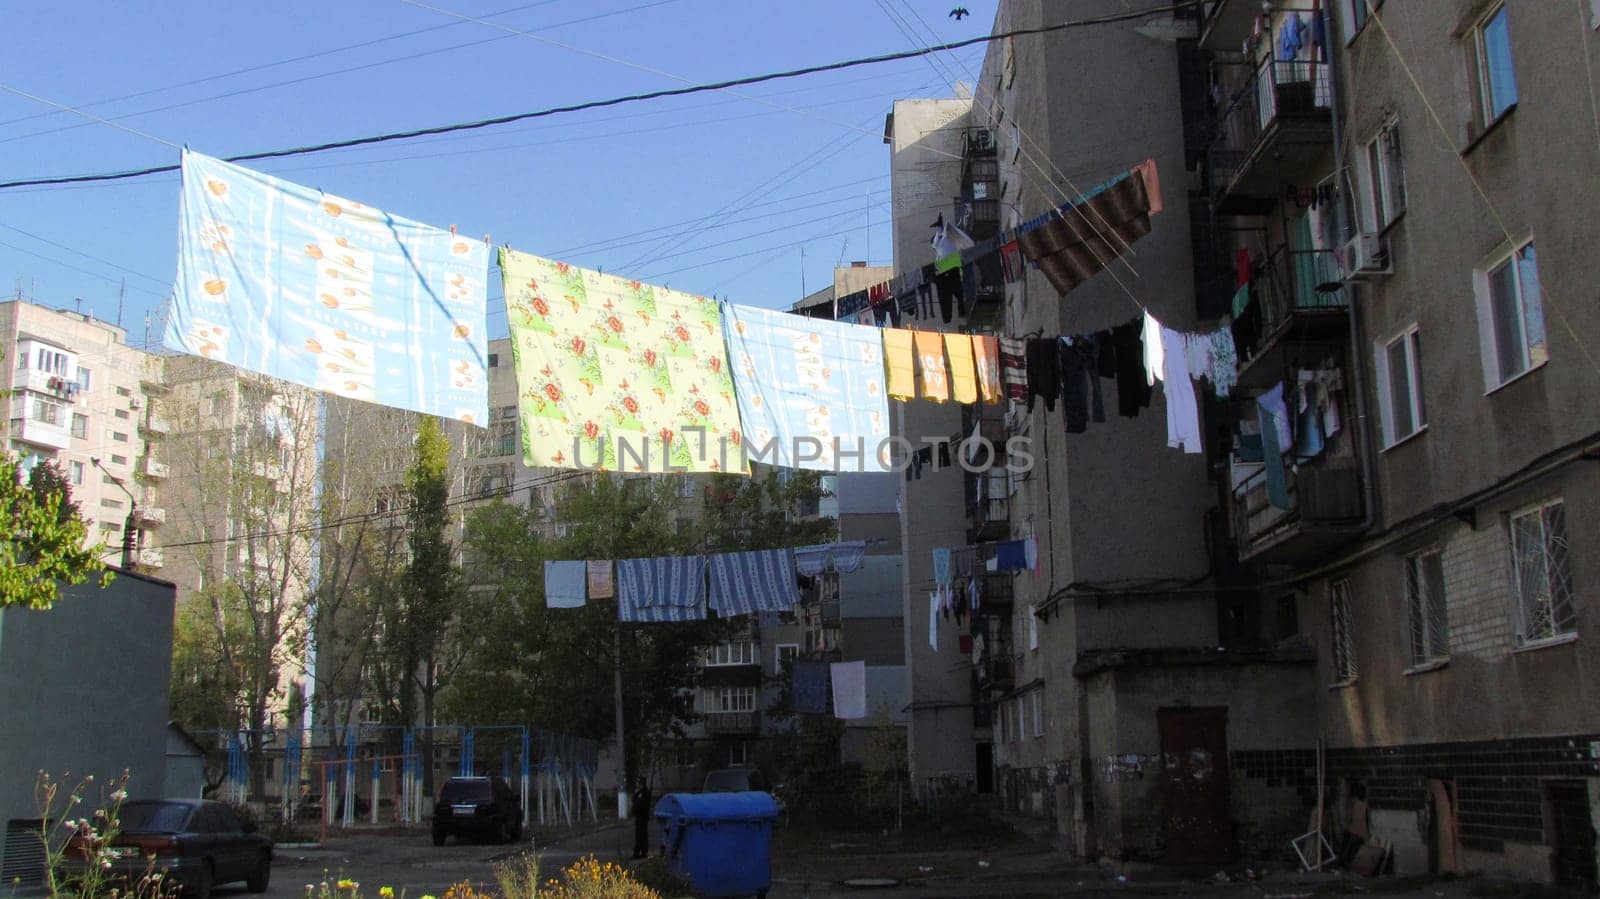 Soviet architecture with laundry drying between high-rise buildings by Maksym